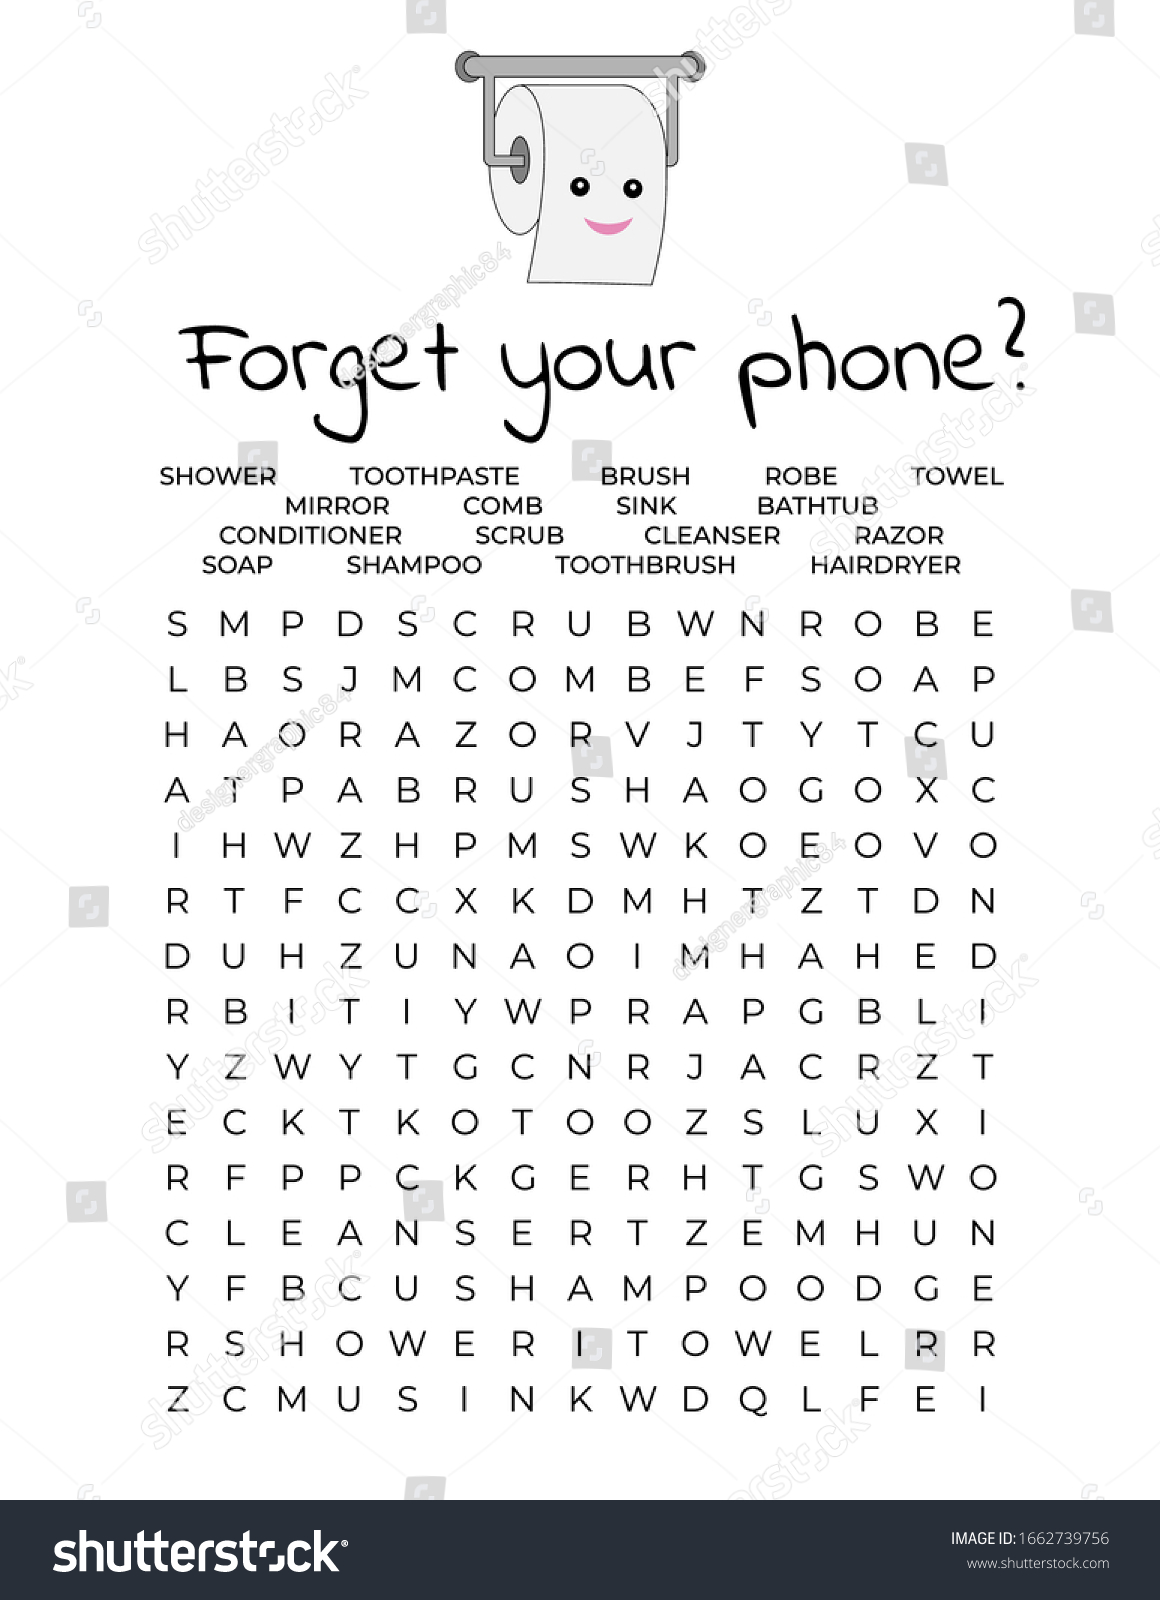 SVG of Forget your phone? Funny restroom poster. Bathroom word search puzzle. Toilet humor. Home wall decor print. Vector illustration. svg